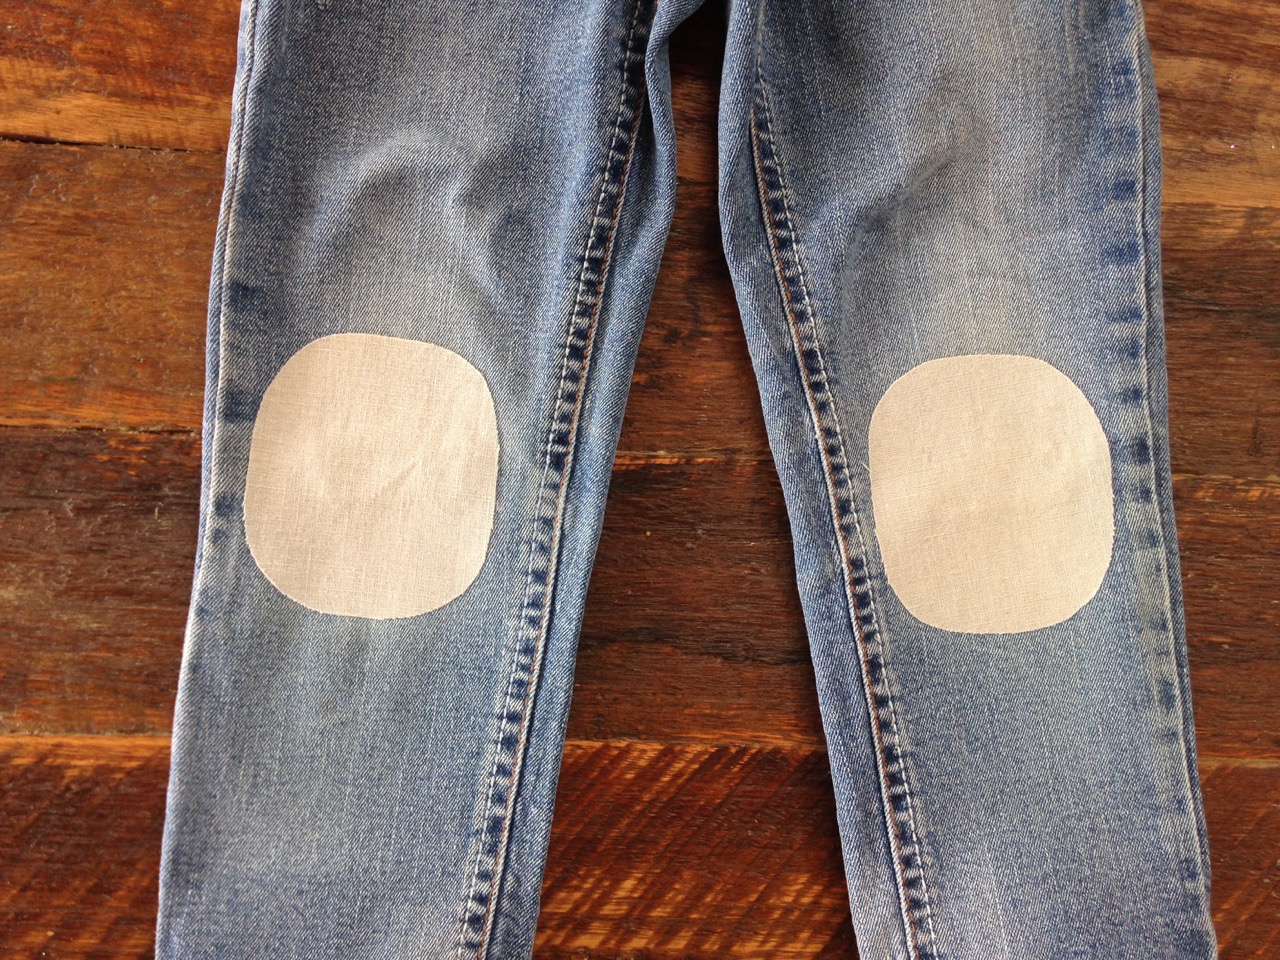 SIZE 2 Kids Curved Knee Patch Pattern & Tutorial. Jeans Patch DIY for  Toddler, Kids. PDF Downloadable Learn to Sew. Children Size 3 to 6. 